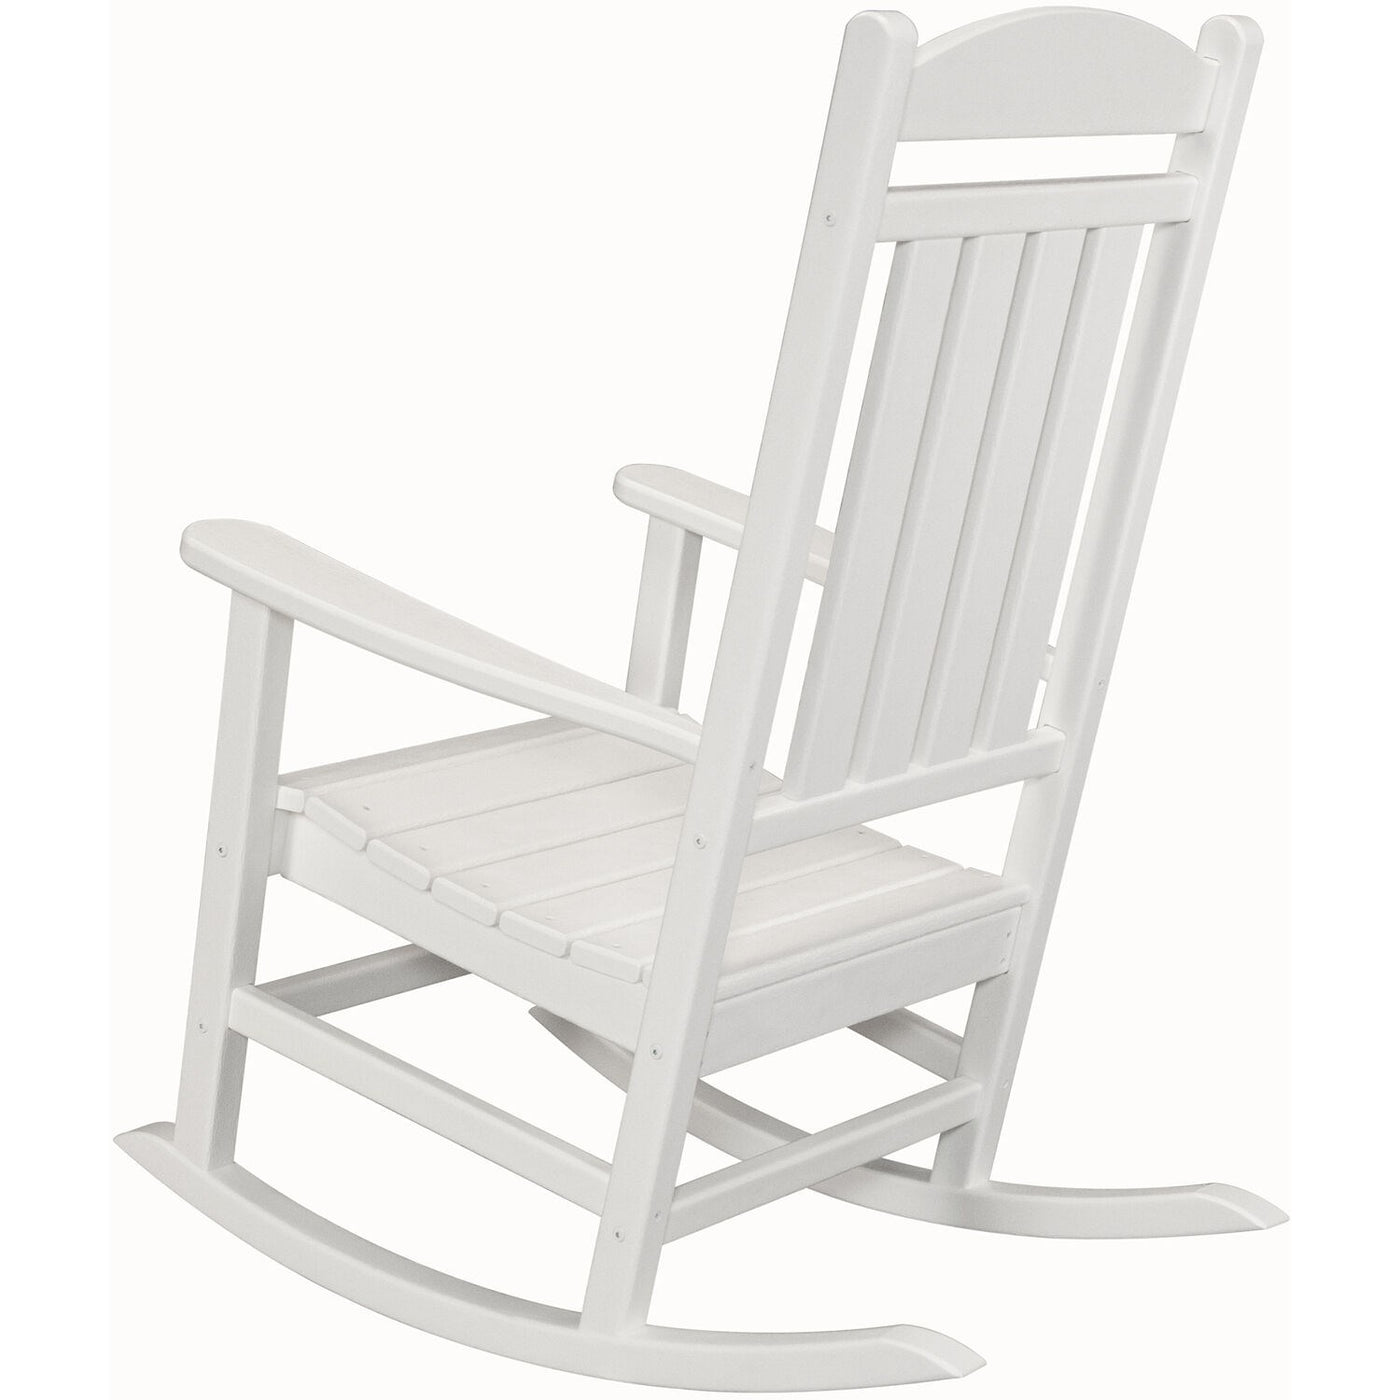 Hanover All-Weather Porch Rocker Set: 2 Porch Rockers and Side Table - White - GreenLivingSupply-Store